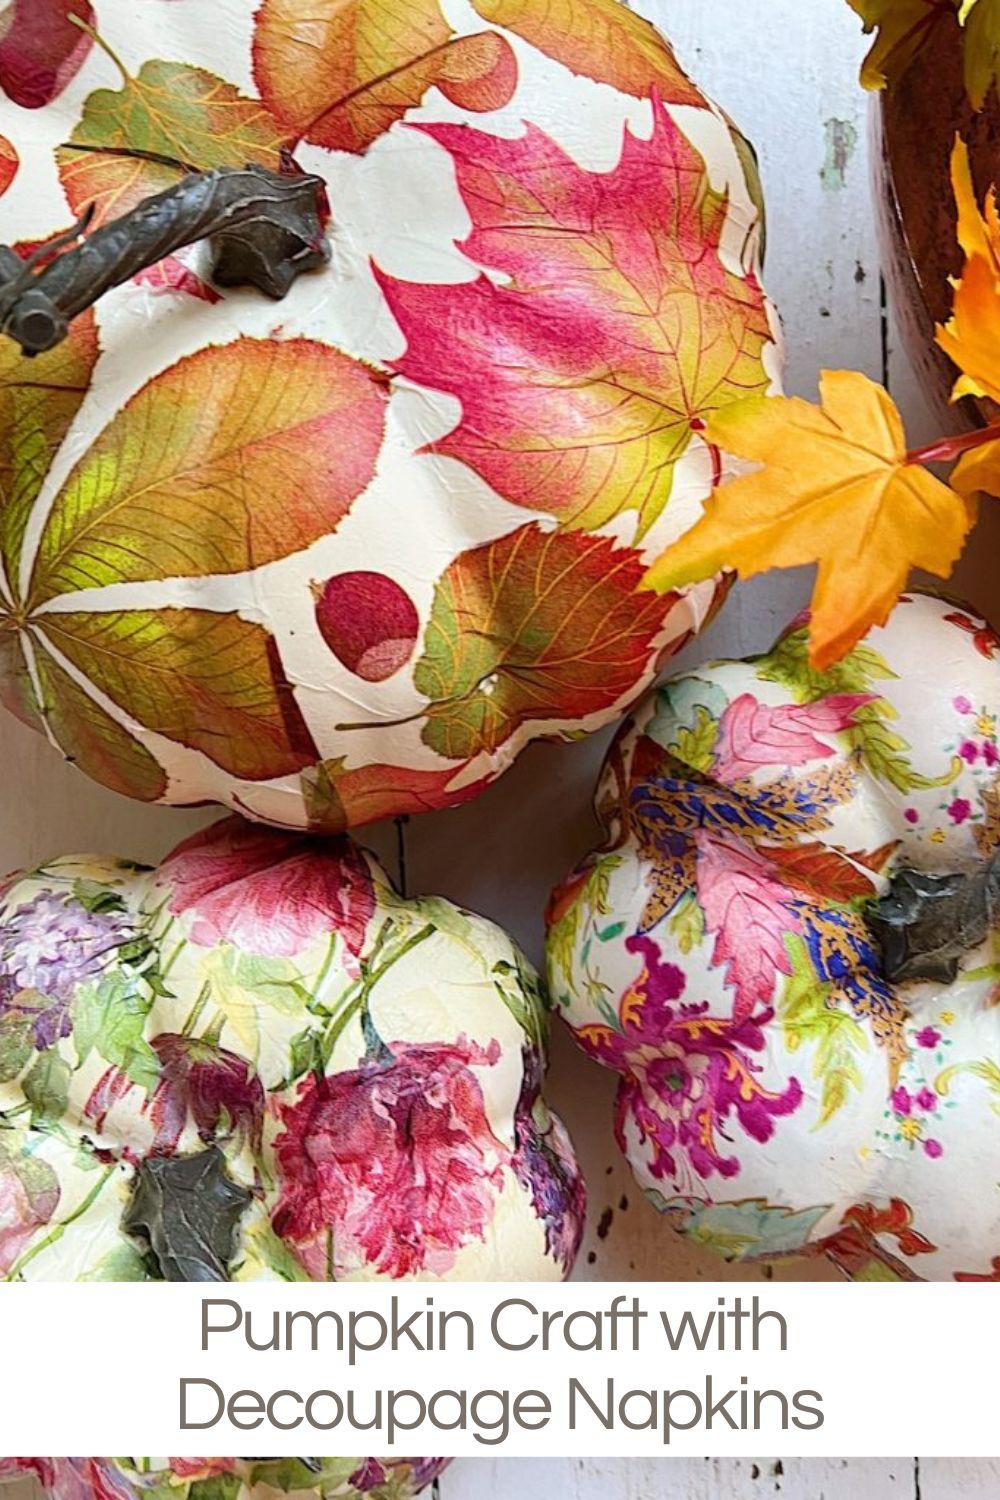 Every fall I make a few pumpkin crafts. This week I repurposed some old faux pumpkins and added decoupage napkins to them.